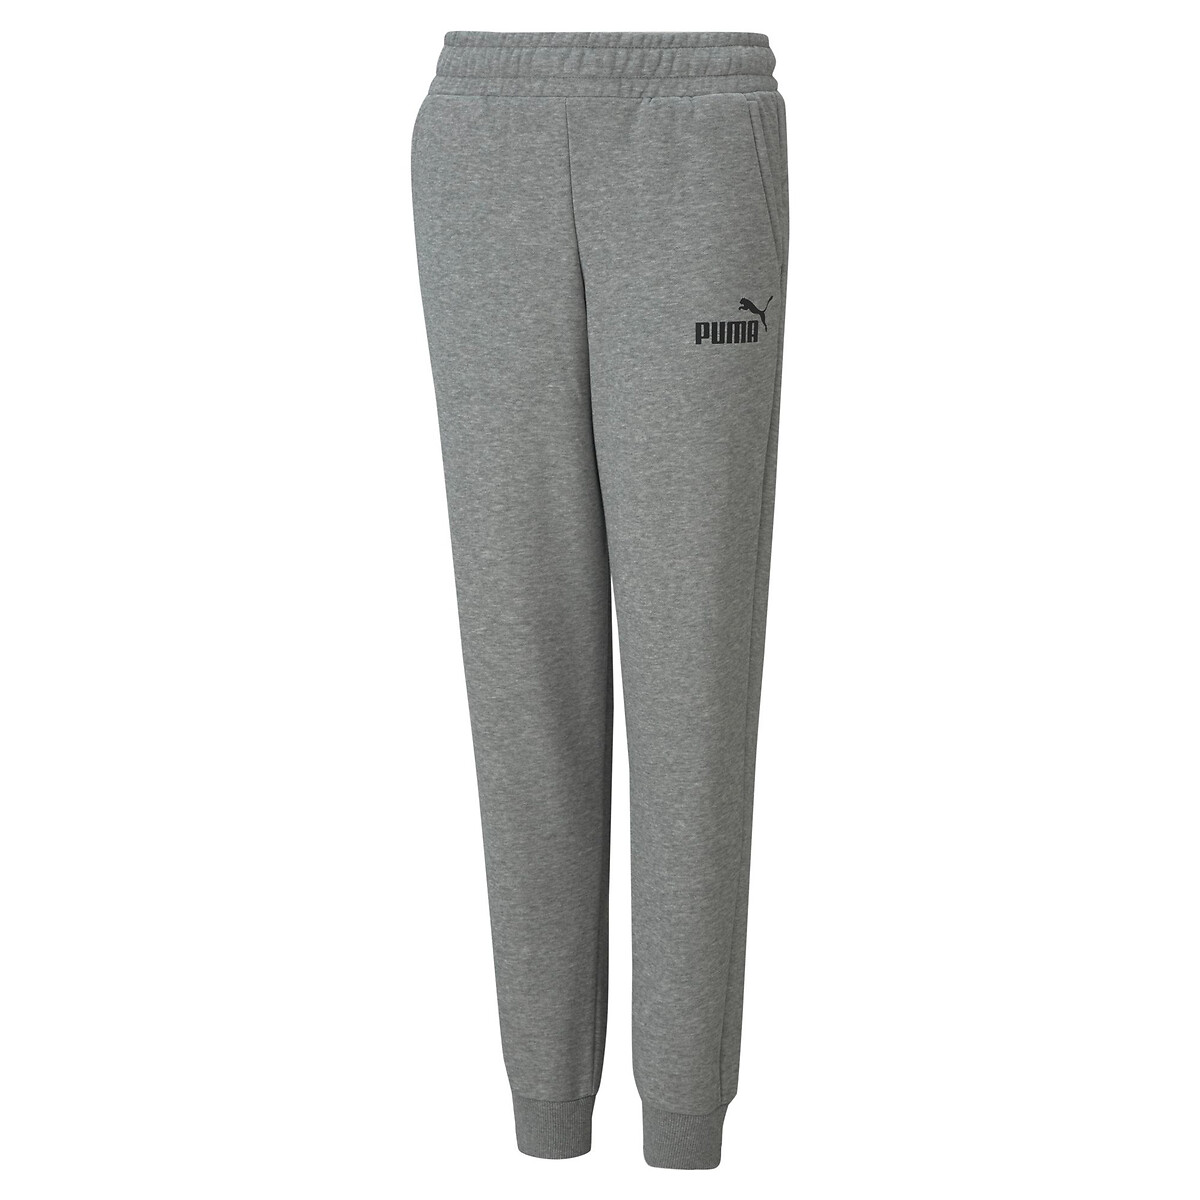 Cotton Mix Joggers, 8-16 Years